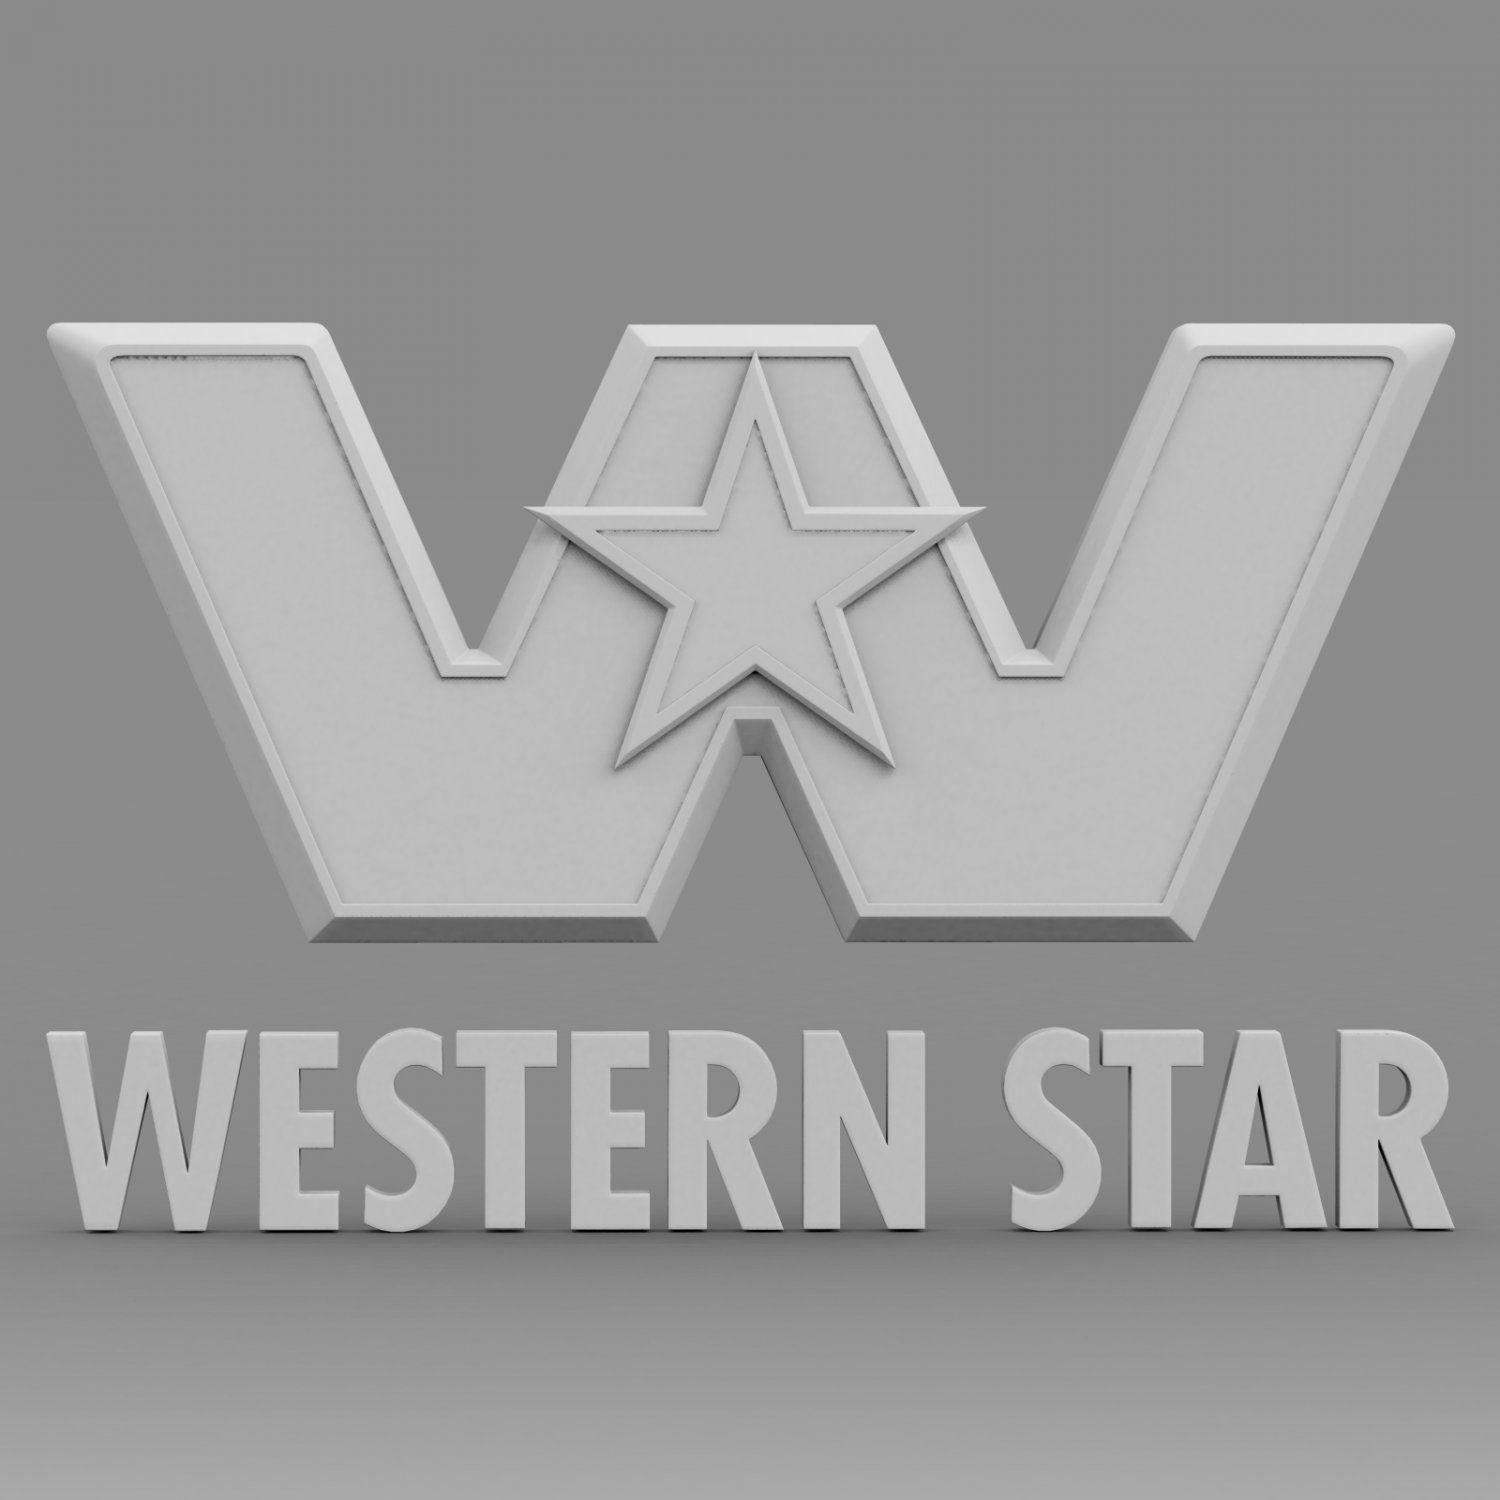 Black and White Western Star Logo - Western star logo 3D Model in Parts of auto 3DExport